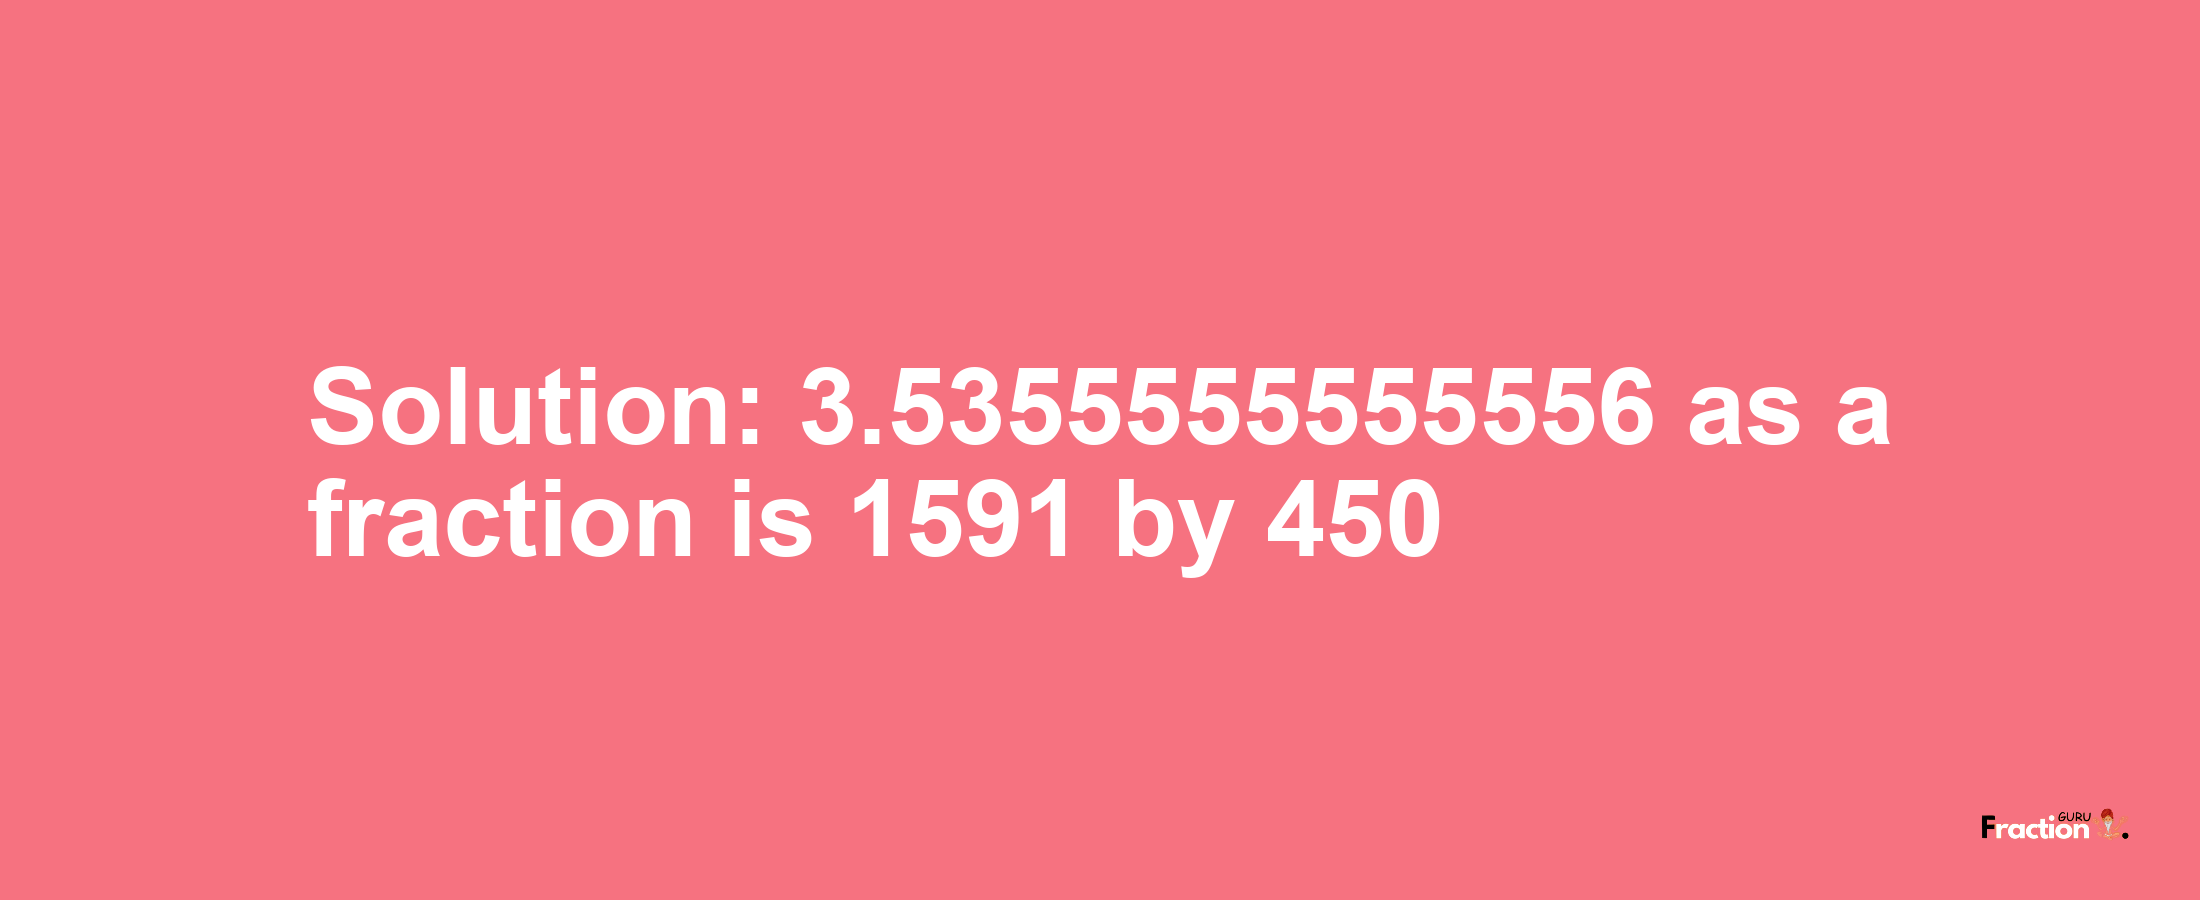 Solution:3.5355555555556 as a fraction is 1591/450